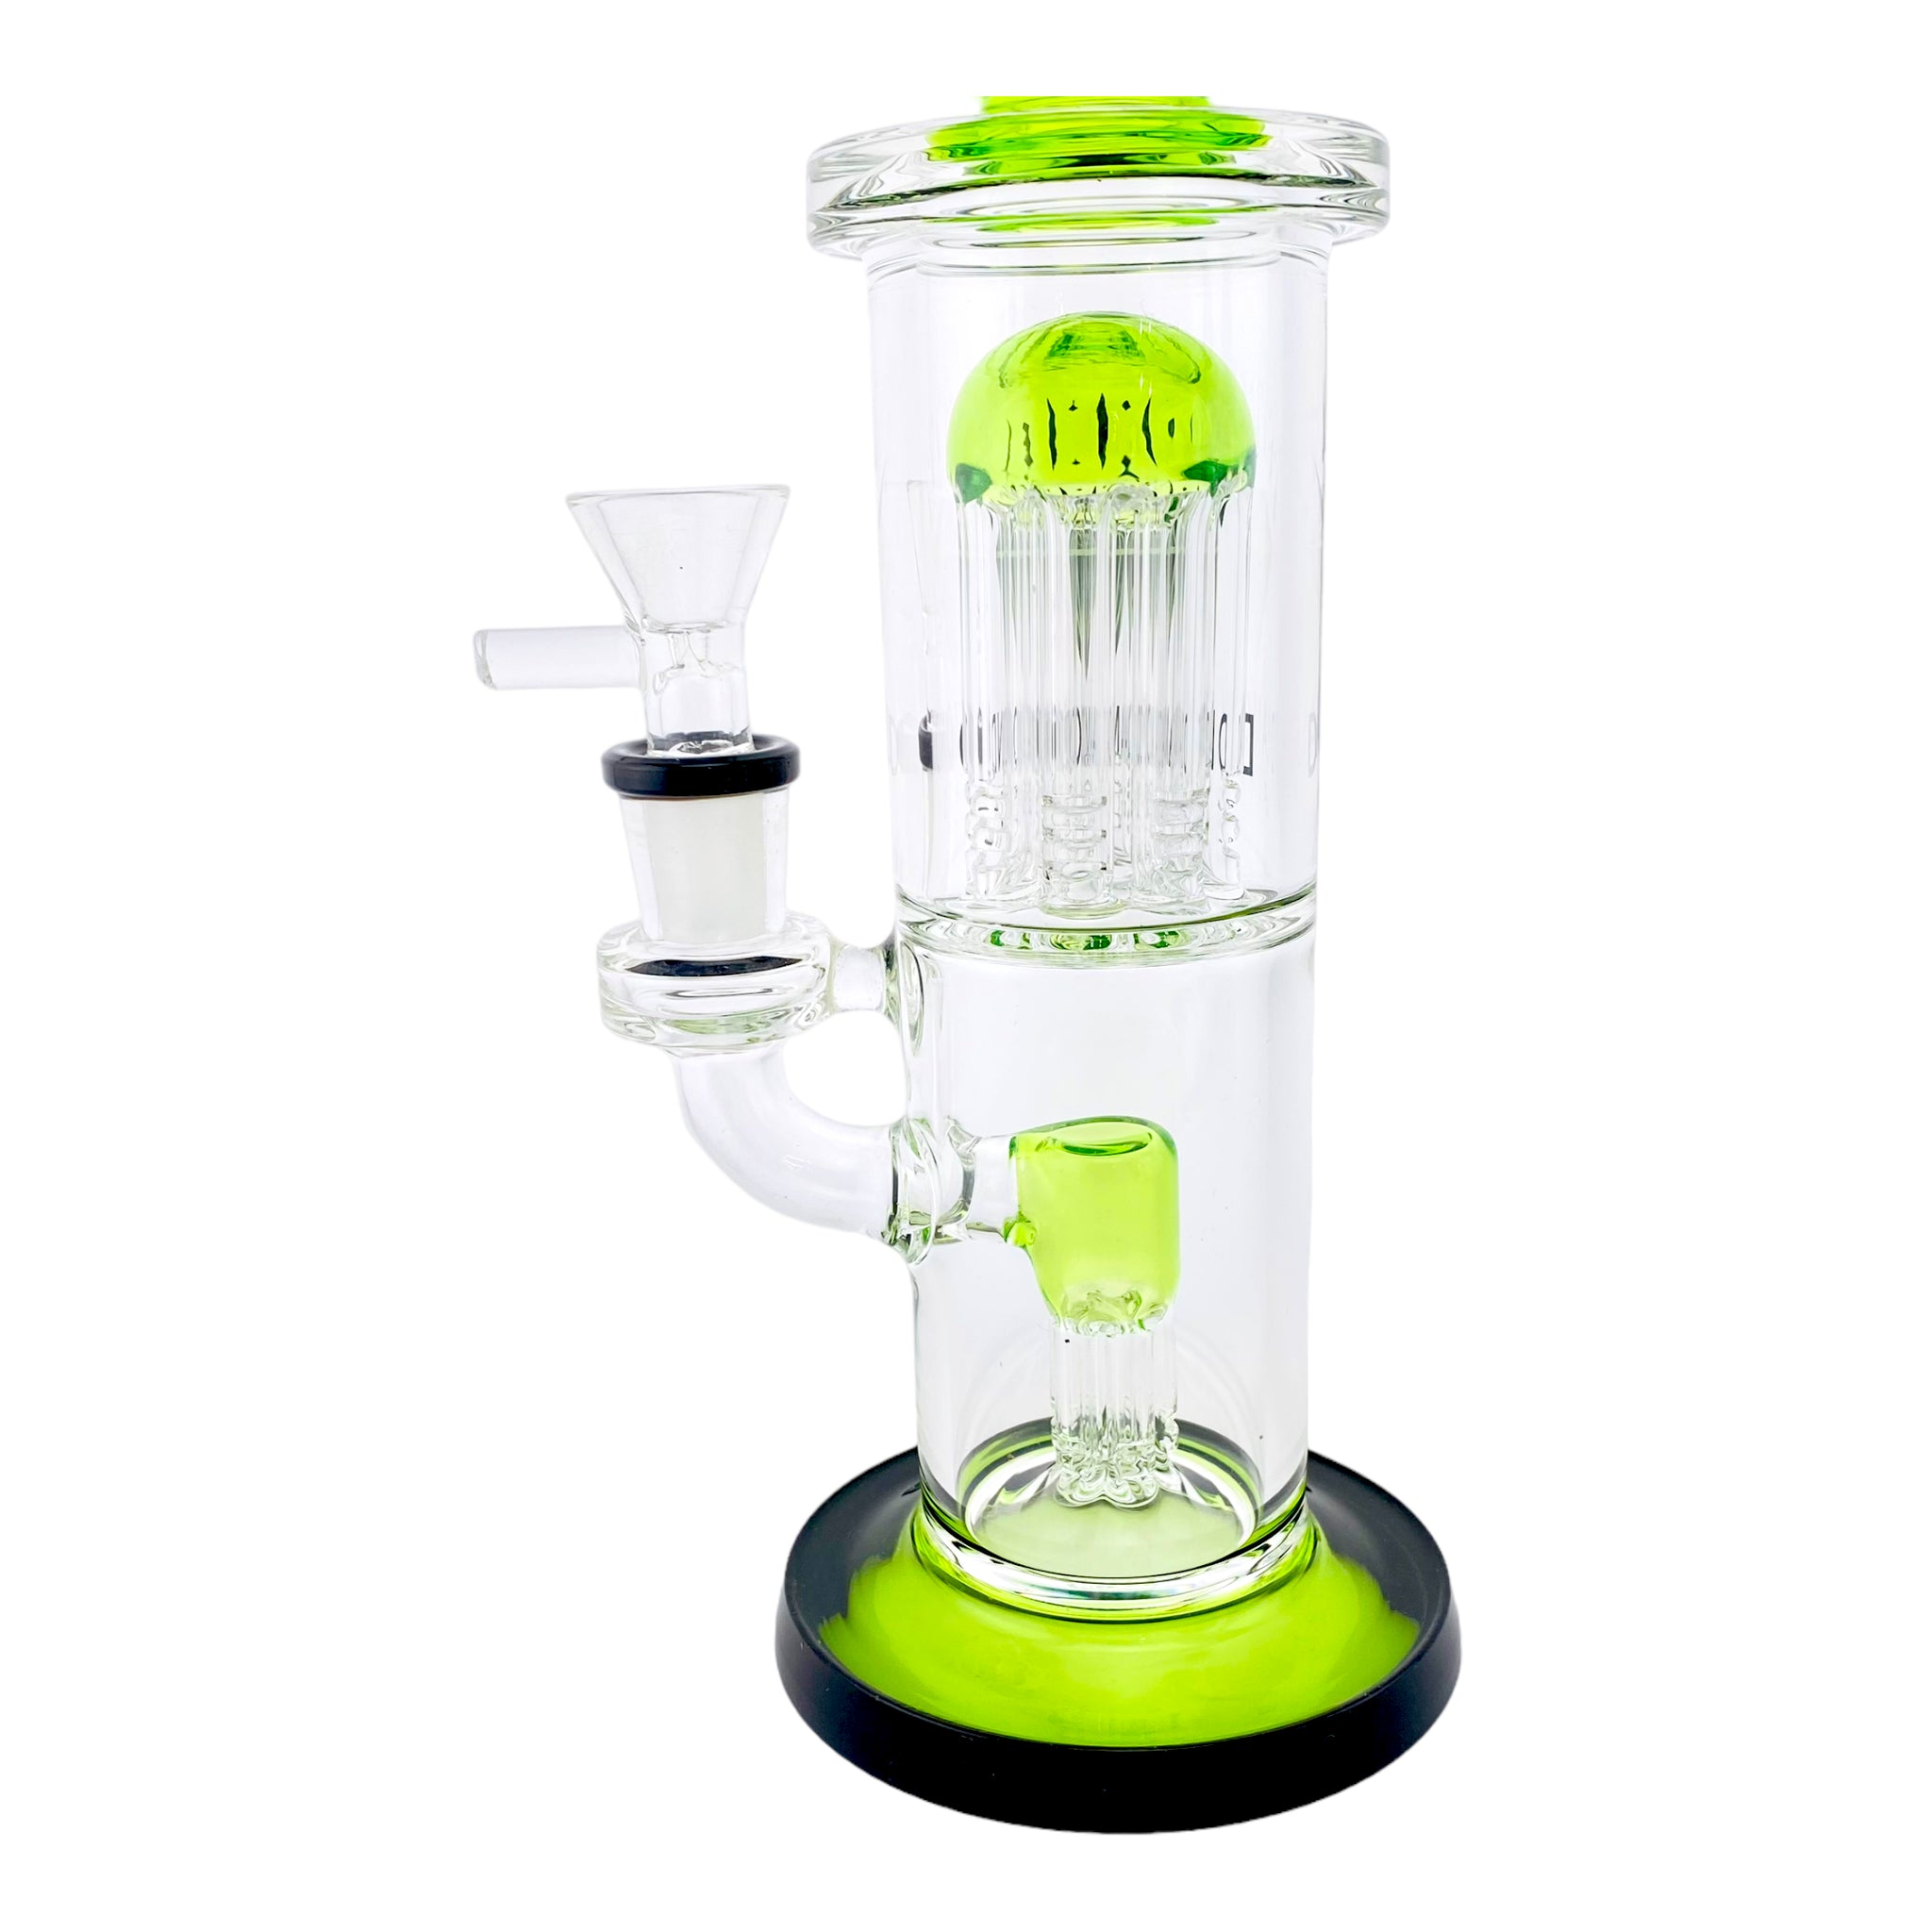 Diamond Glass Bubbler Bong With Double Tree Perc & Green & Black Accents